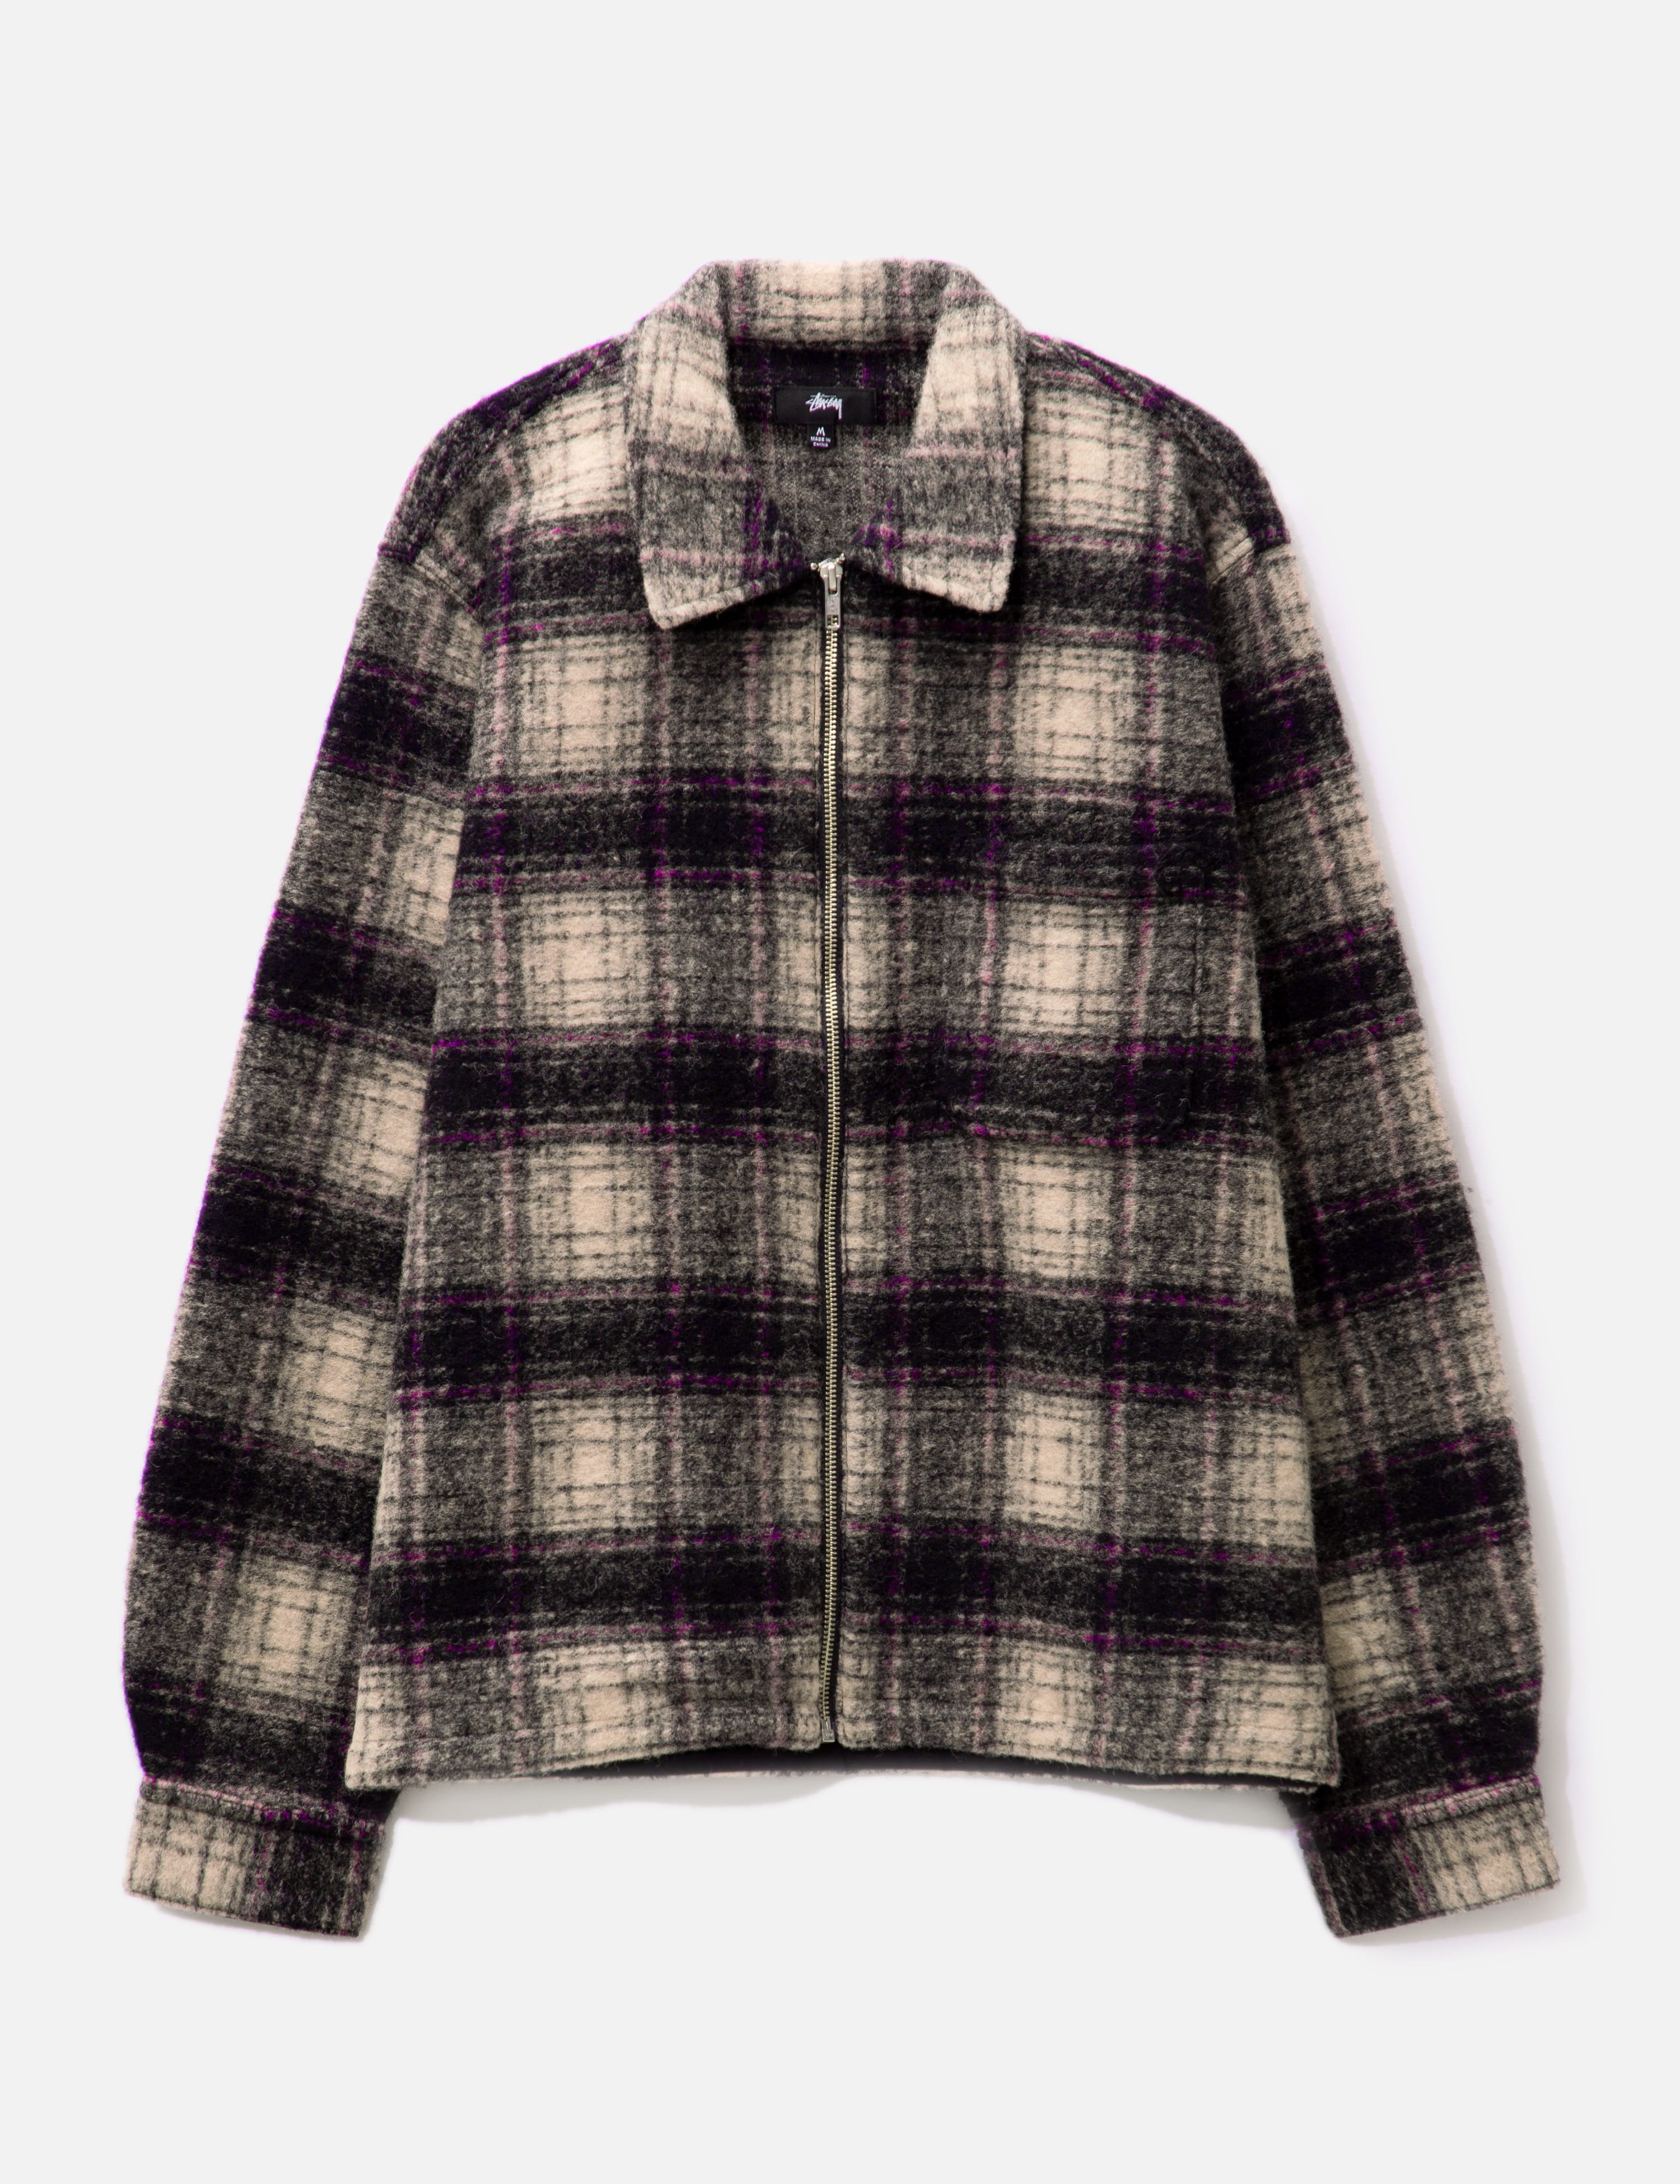 Stüssy - Wool Plaid Zip Shirt | HBX - Globally Curated Fashion and 